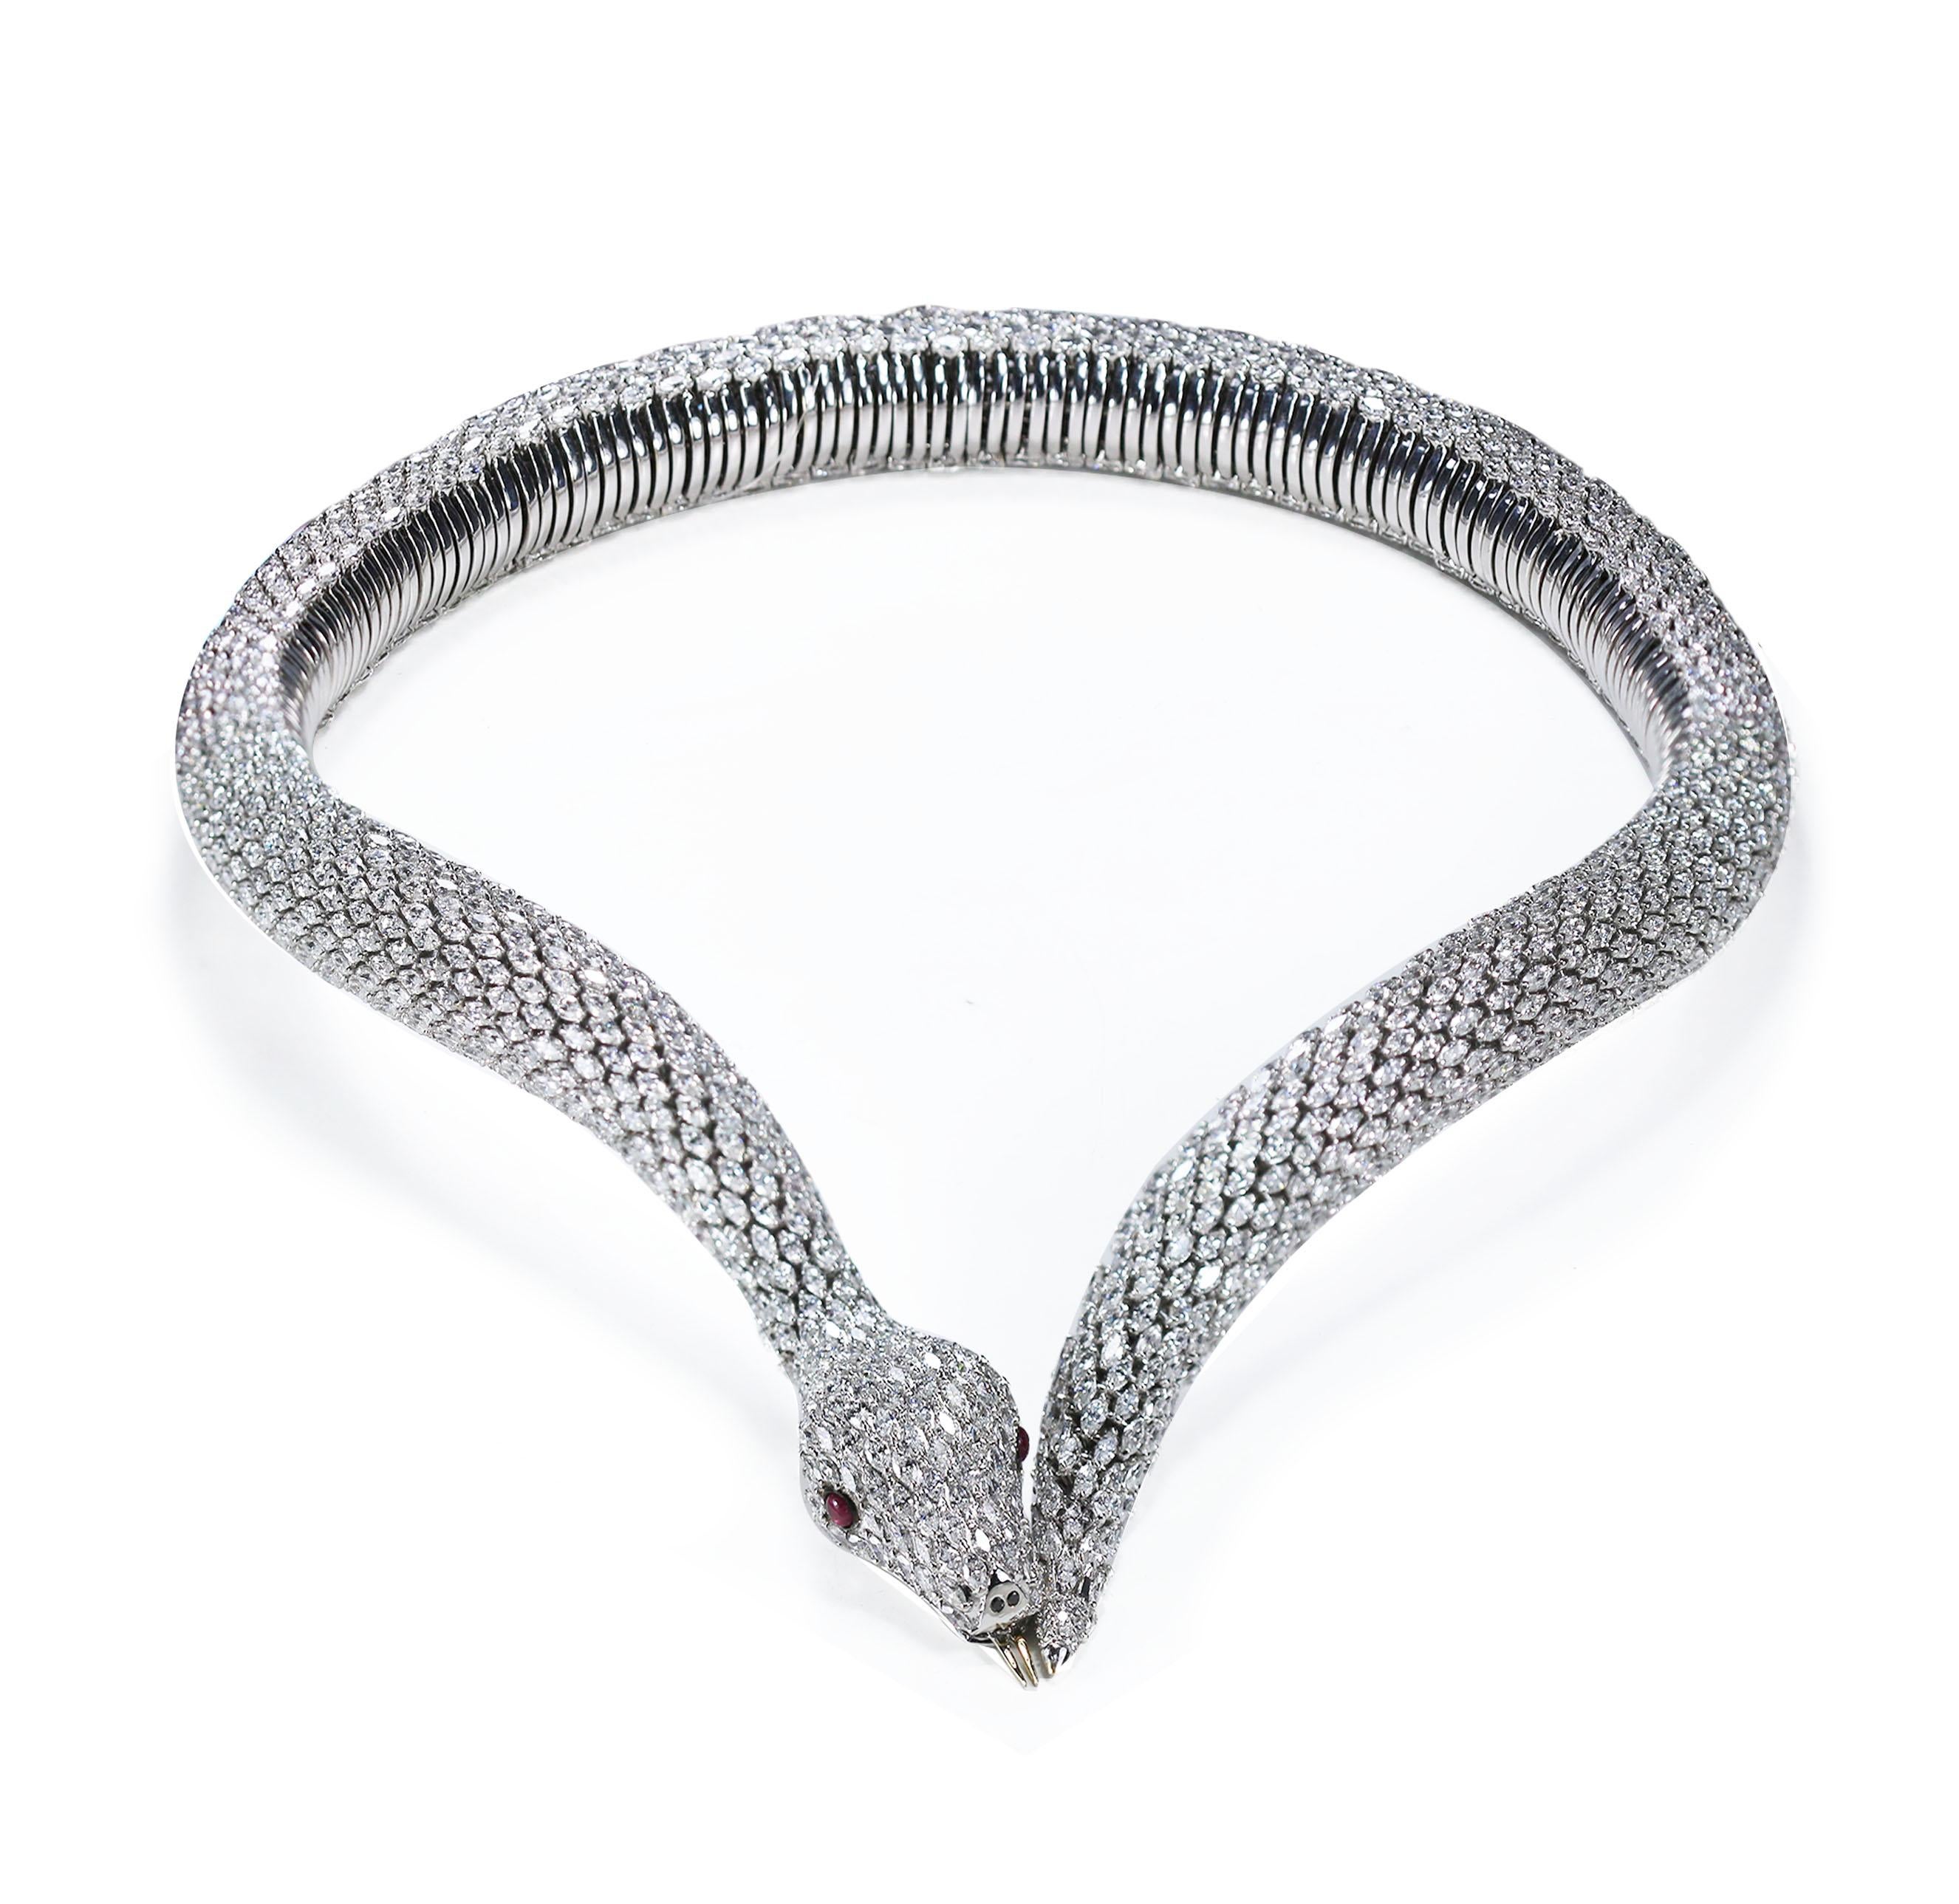 Diamonds, Black diamonds and Ruby Snake Spring necklace

Our serpentine-inspired collar necklace recreates the luxuriousness of snakeskin with this diamond, black diamond and ruby necklace in a prong setting, on a base of 18K white gold. Prepare to